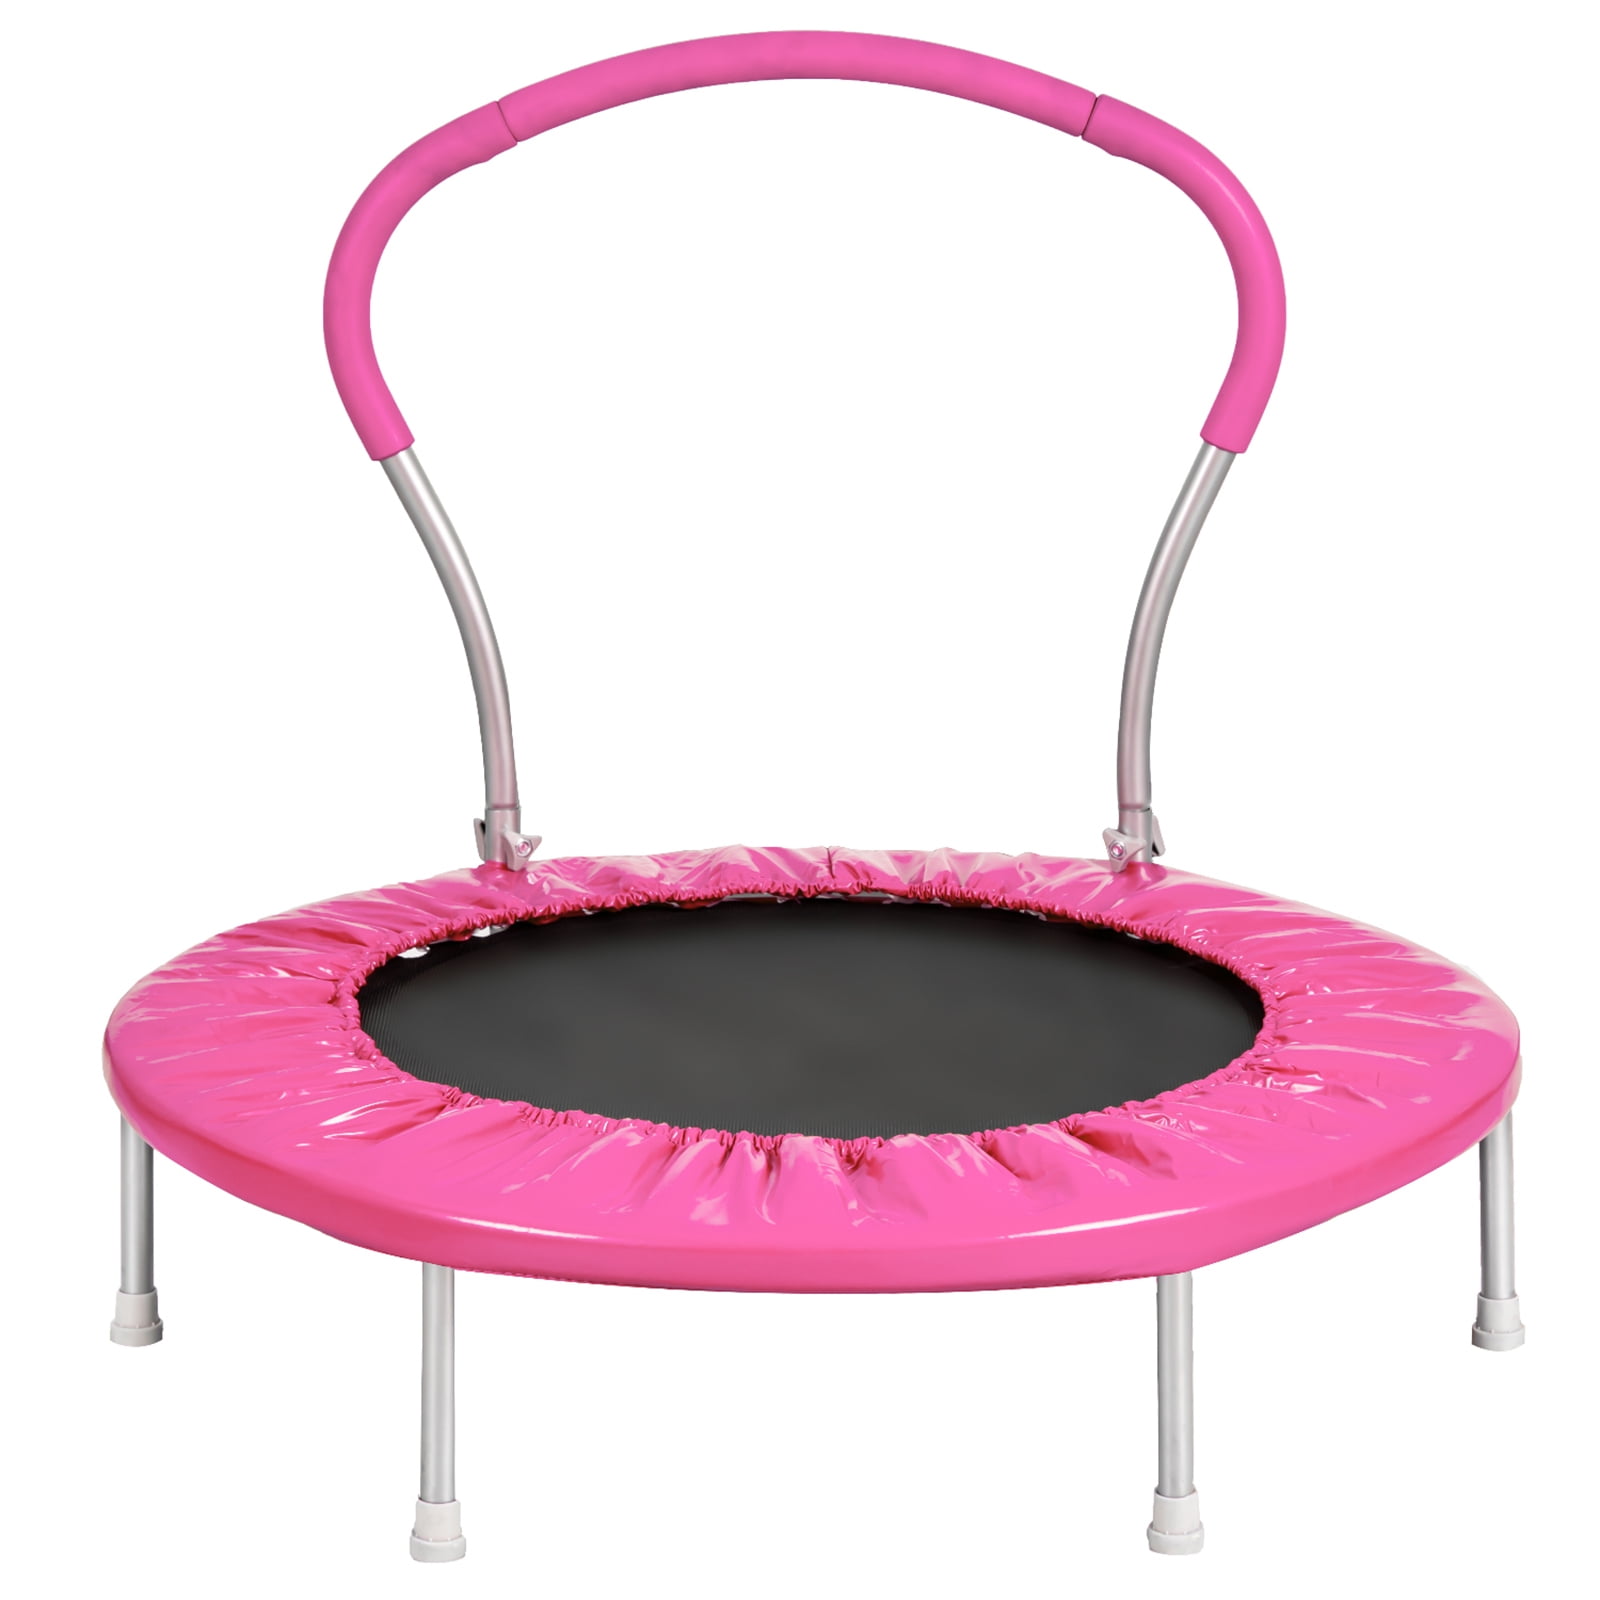 Mini Exercise Trampoline For Adults, Fitness Rebounder Trampoline